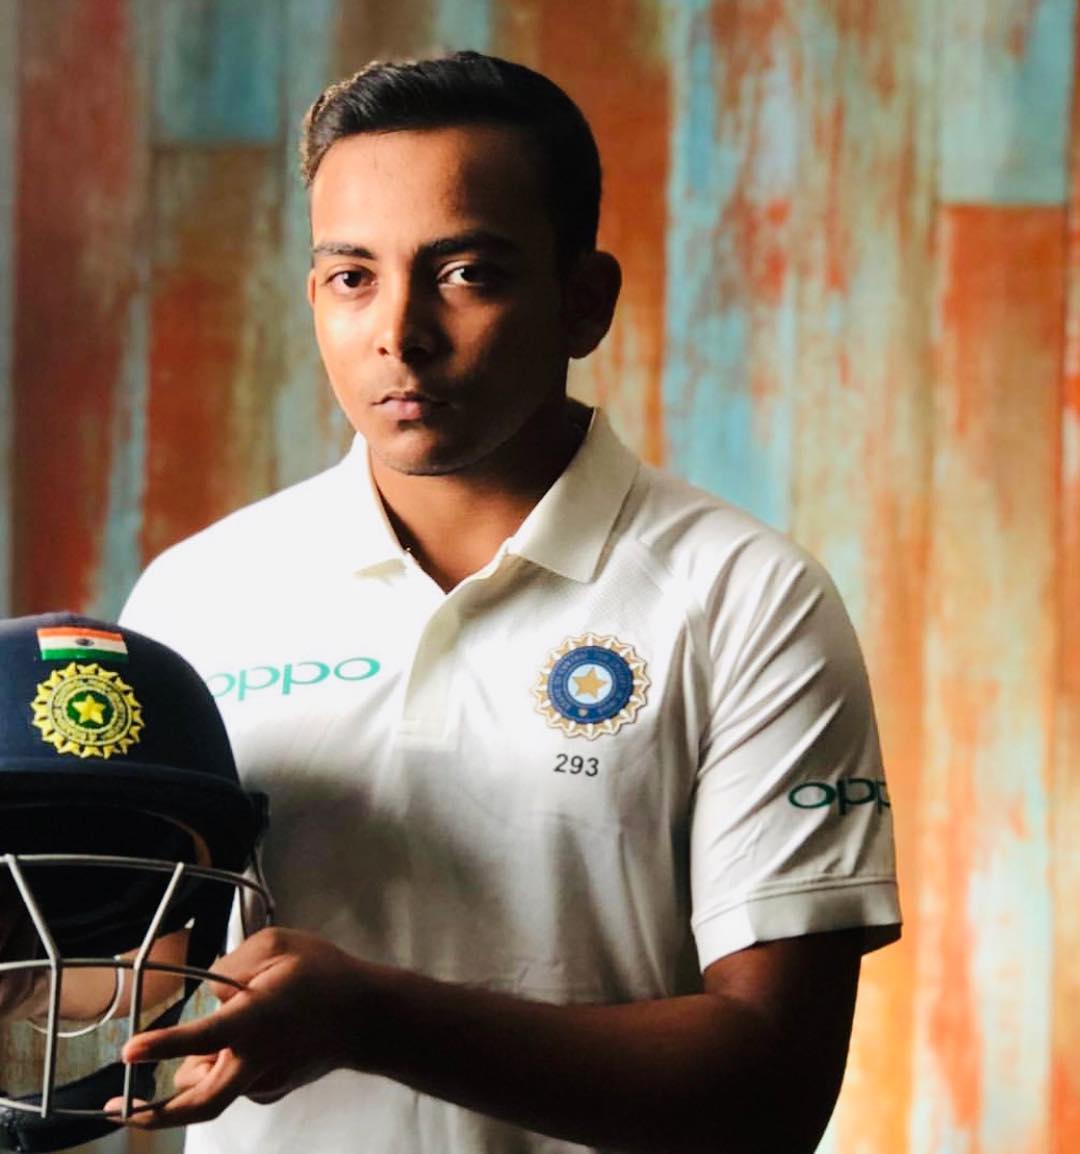 Prithvi Shaw Hairstyle 11 1 Cricketer Prithvi Shaw hairstyles | Hairstyles of Prithvi Shaw | Indian Crickter Prithvi Shaw hairstyles Prithvi Shaw Hairstyles